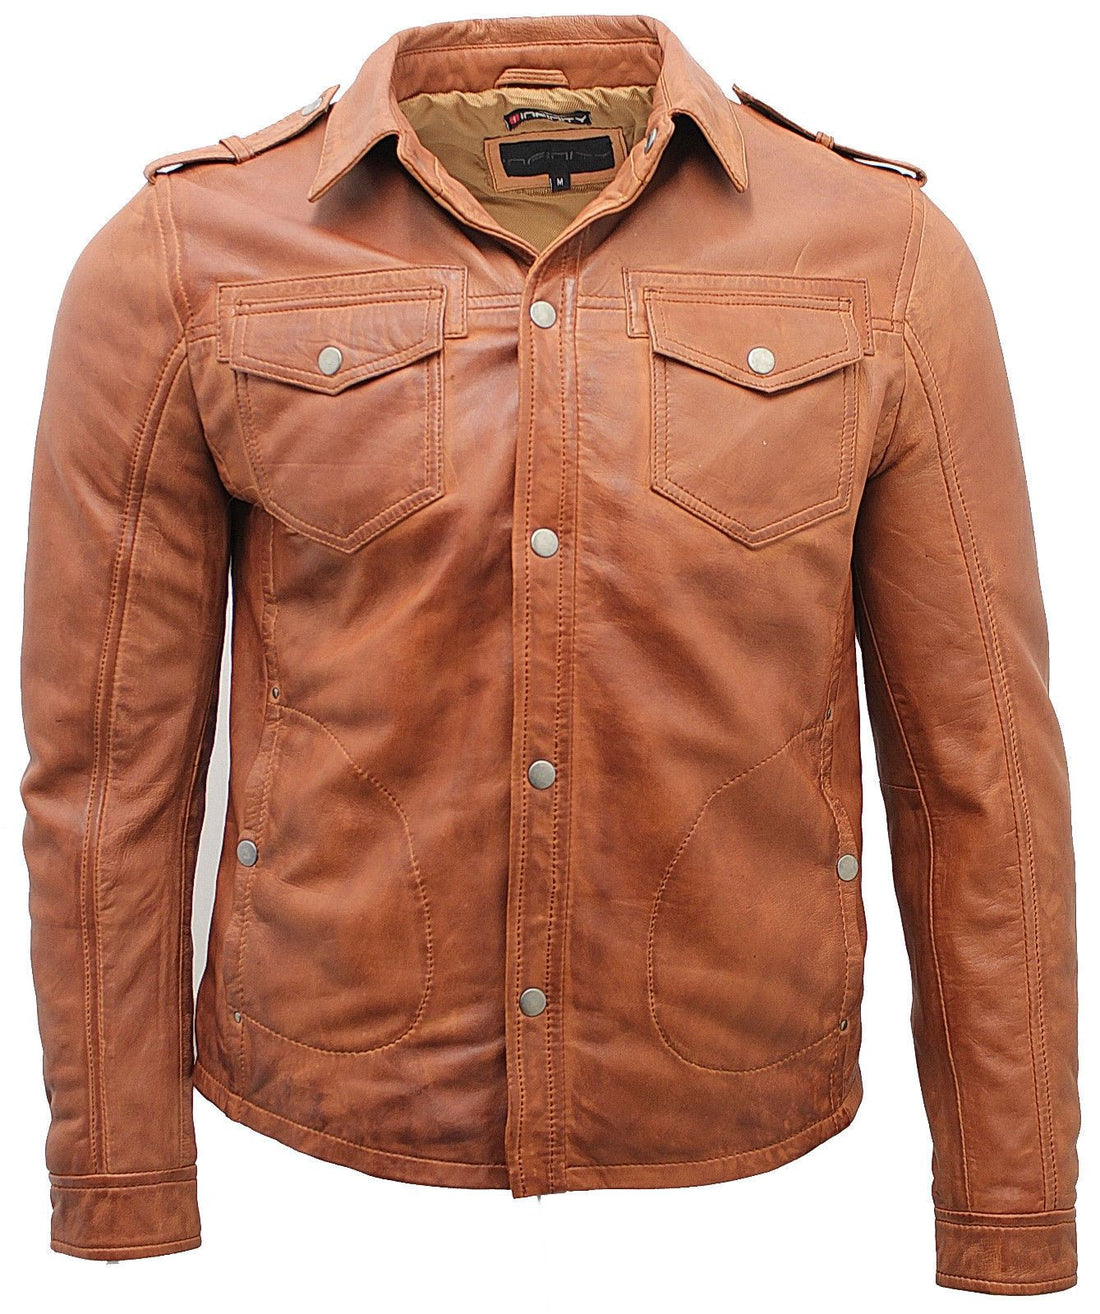 Mens Leather Jeans Style Shirt Jacket-Dawley